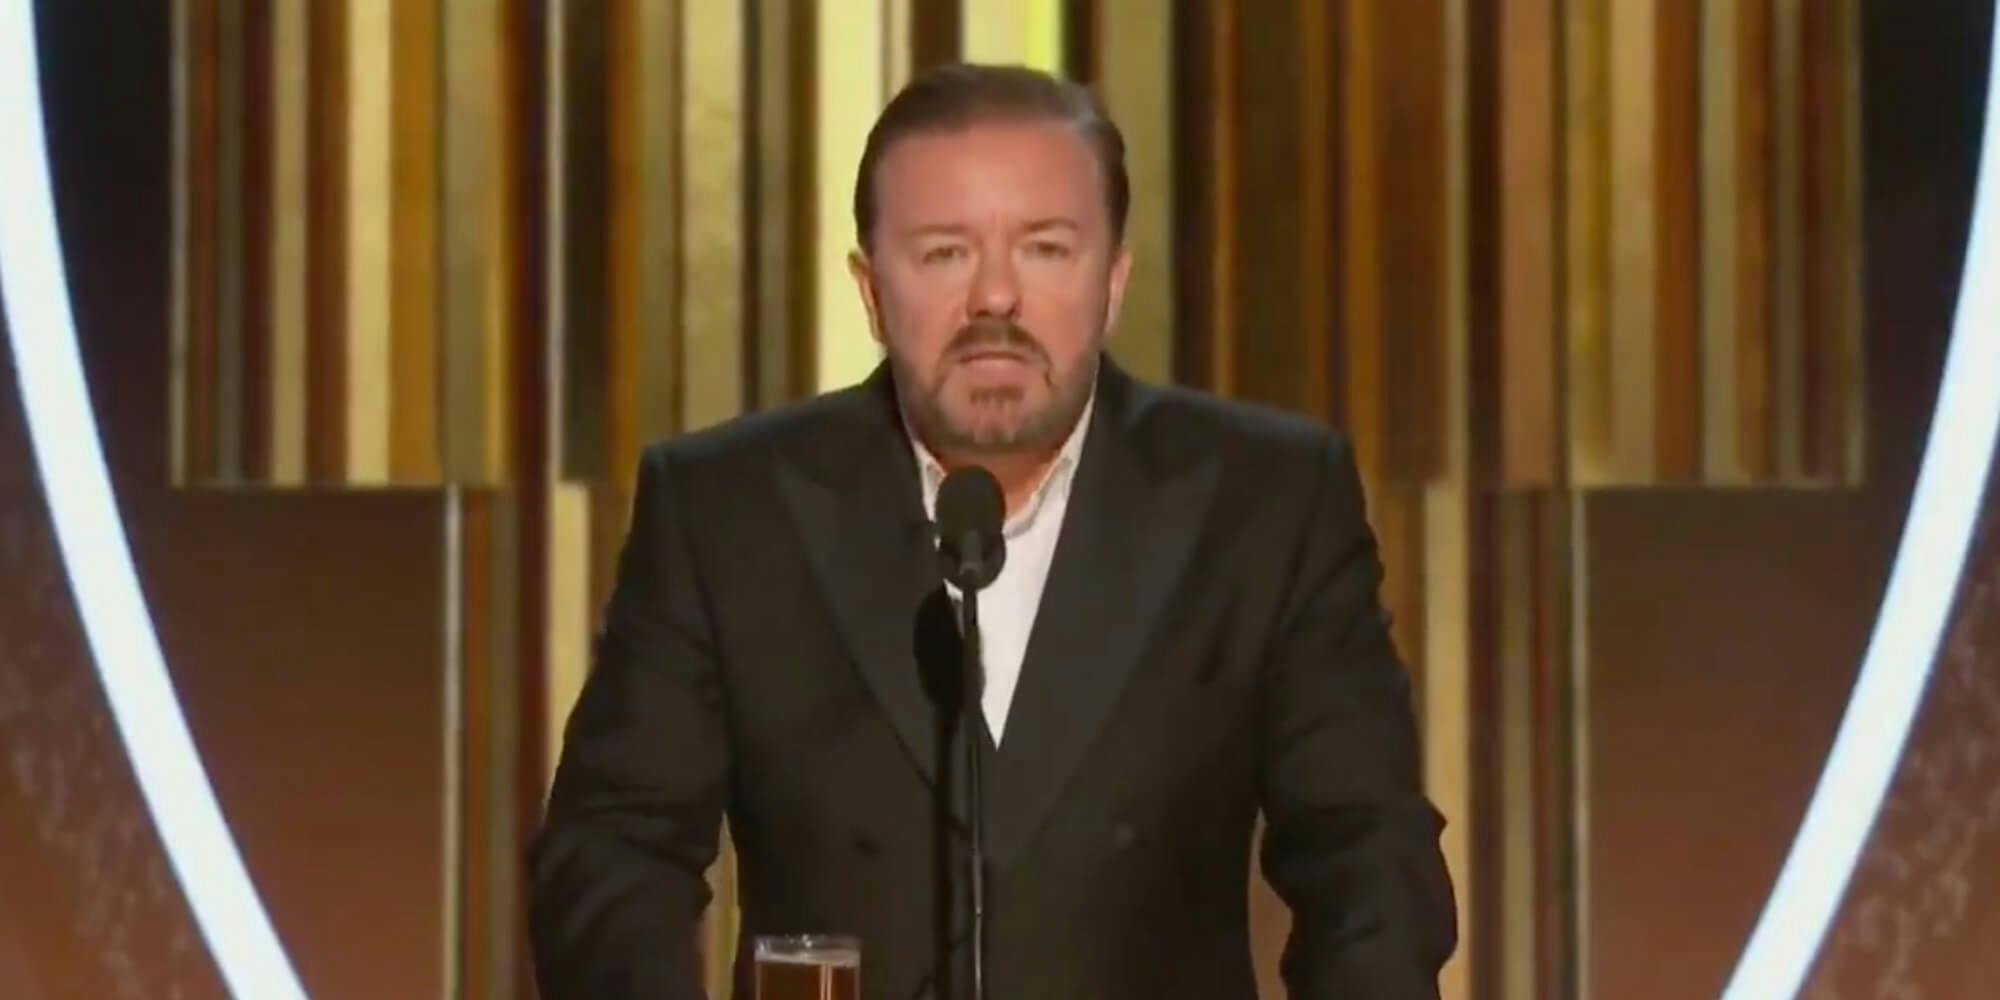 Ricky Gervais Absolutely Roasted Hollywood In Golden Globes Speech